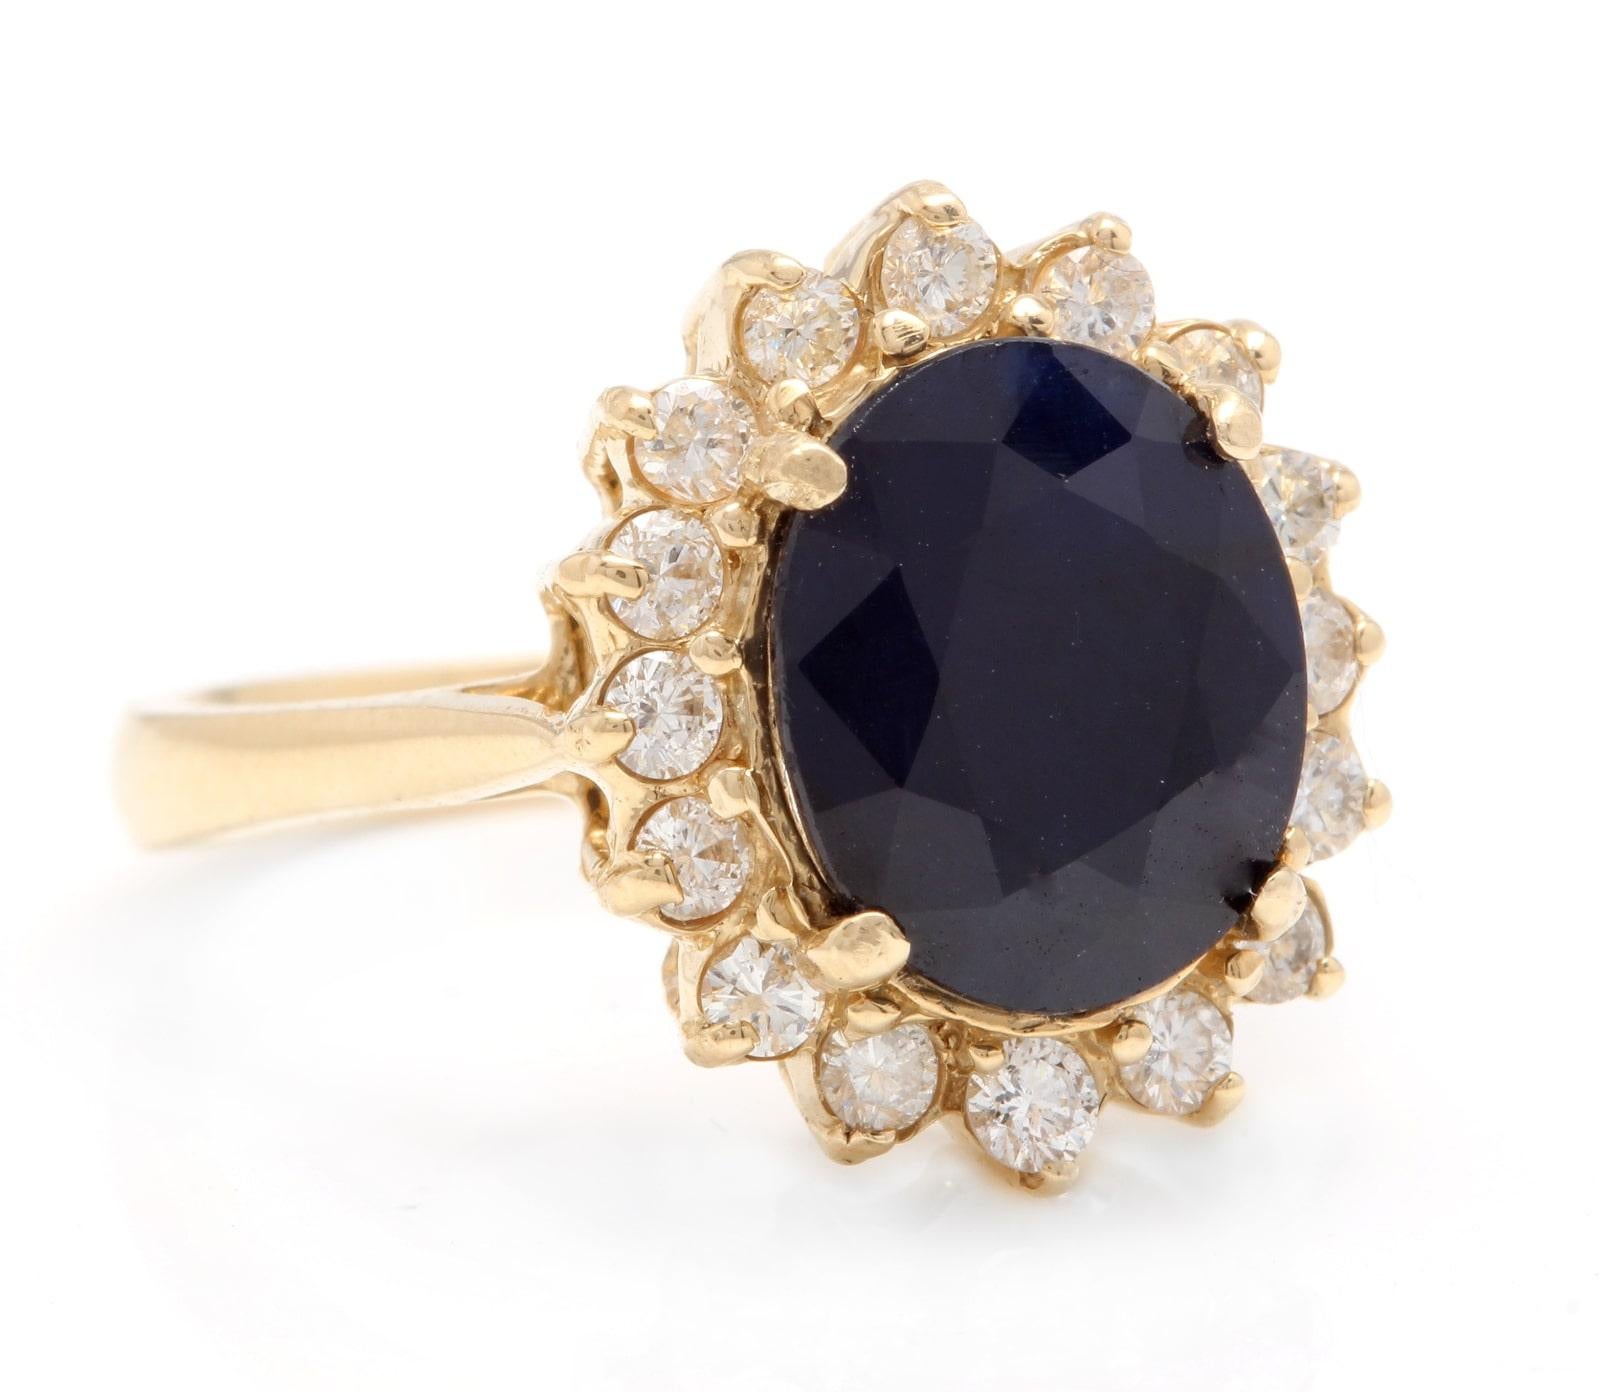 6.70 Carats Impressive Natural Sapphire and Natural Diamond 14K Yellow Gold Ring

Stamped: 14K

Total Sapphire Weight is: Approx. 6.00 Carats

Sapphire Treatment: Diffusion

Sapphire Measures: Approx. 11.00 x 9.00mm

Natural Round Diamonds Weight: